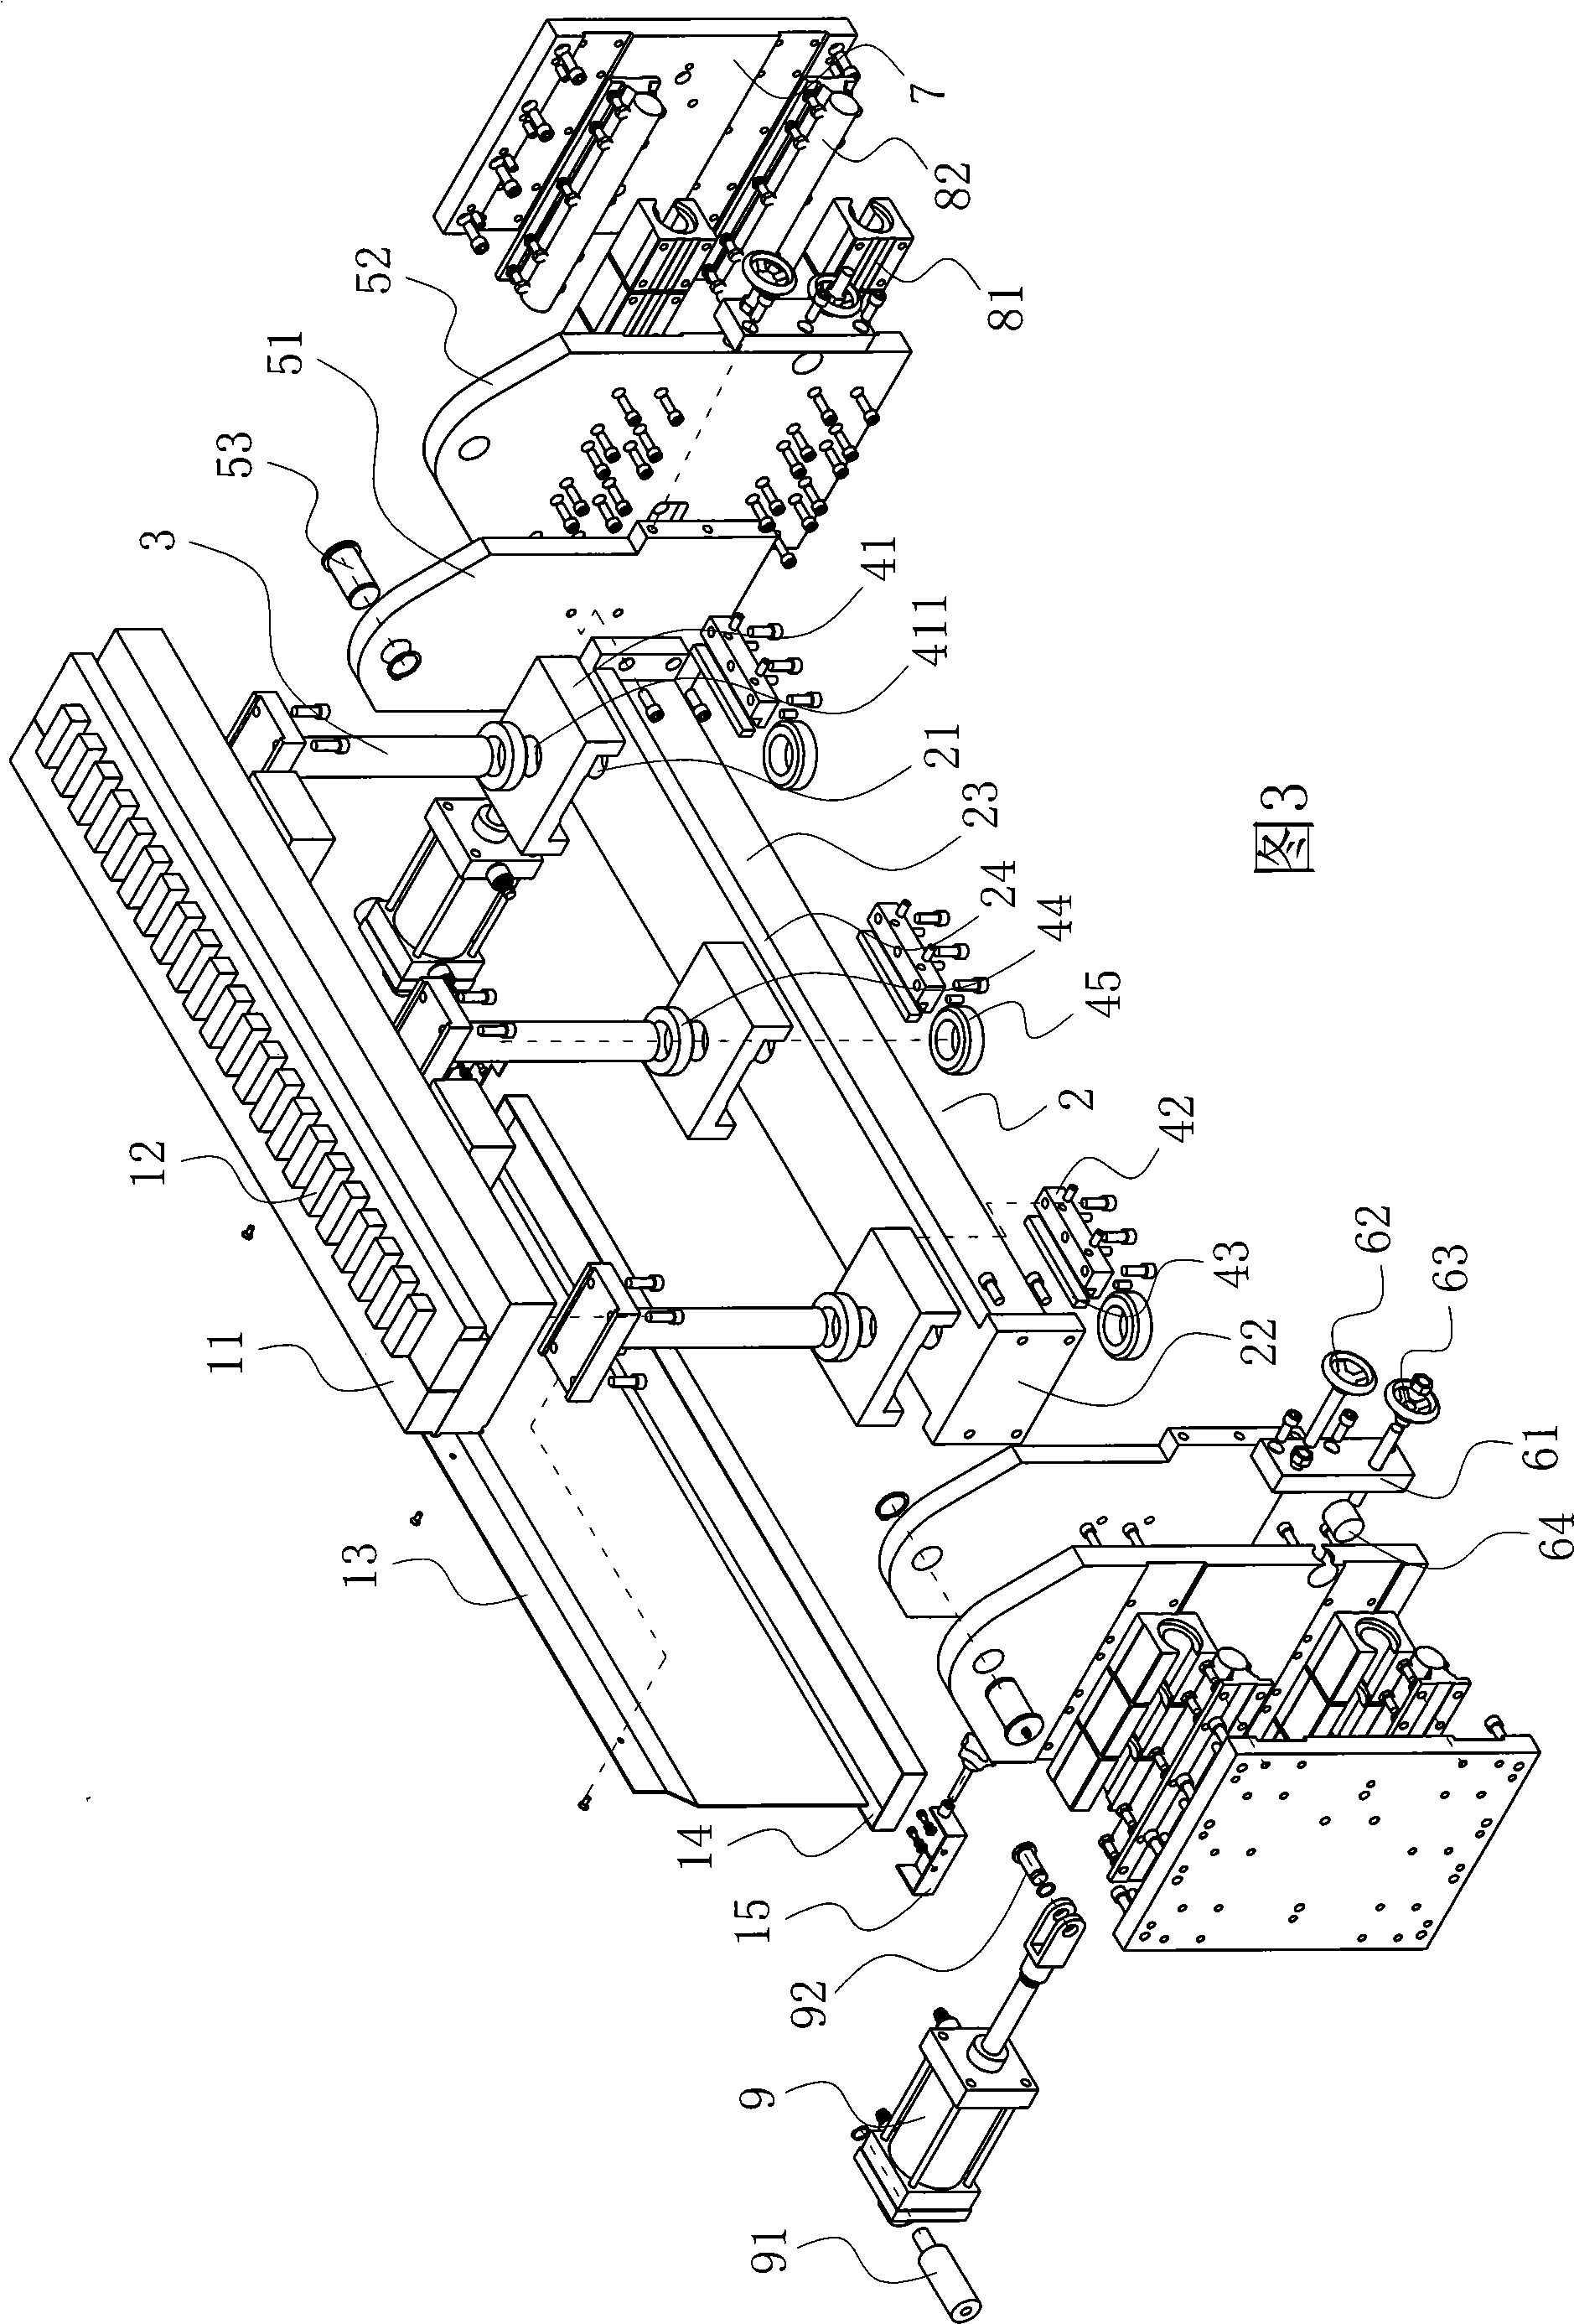 Narrow slit type coating apparatus with improved support mechanism